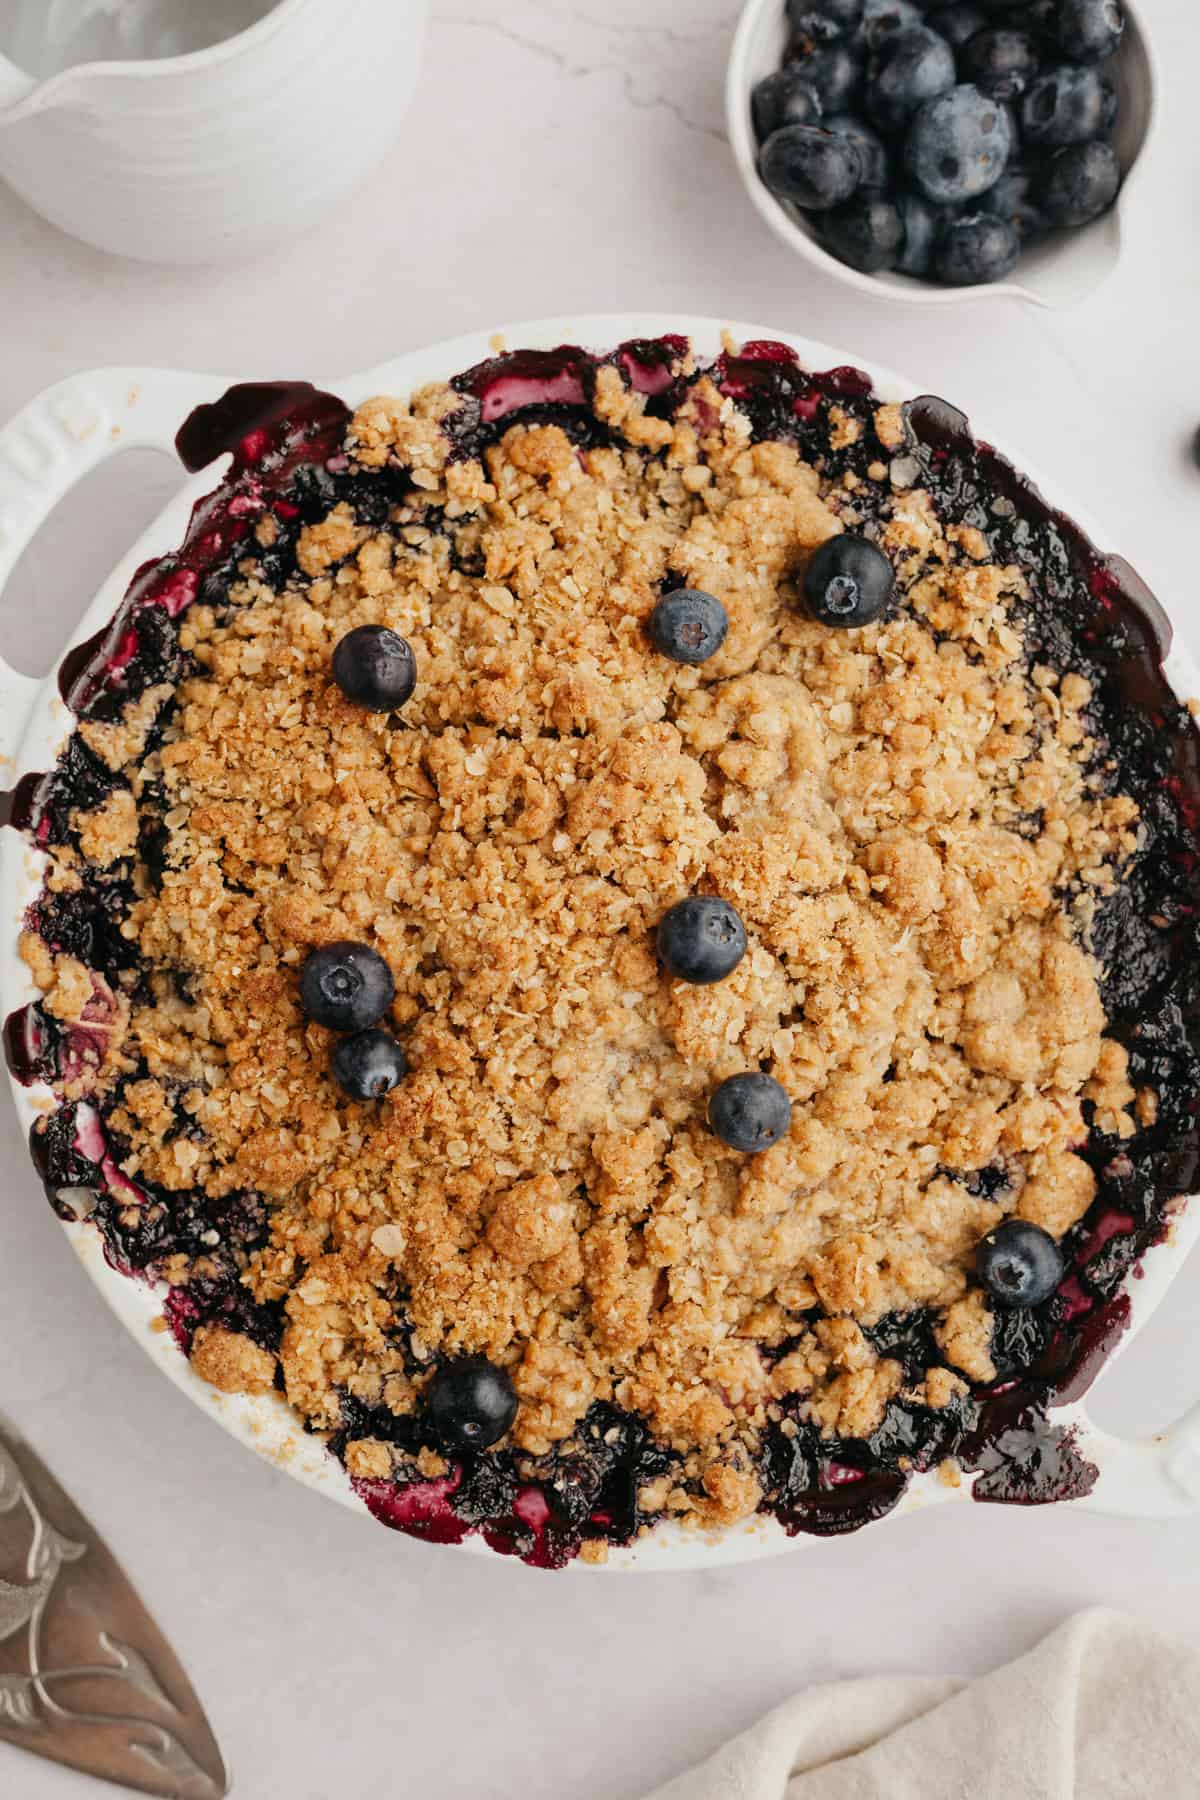 A blueberry and apple crumble in a white baking dish.